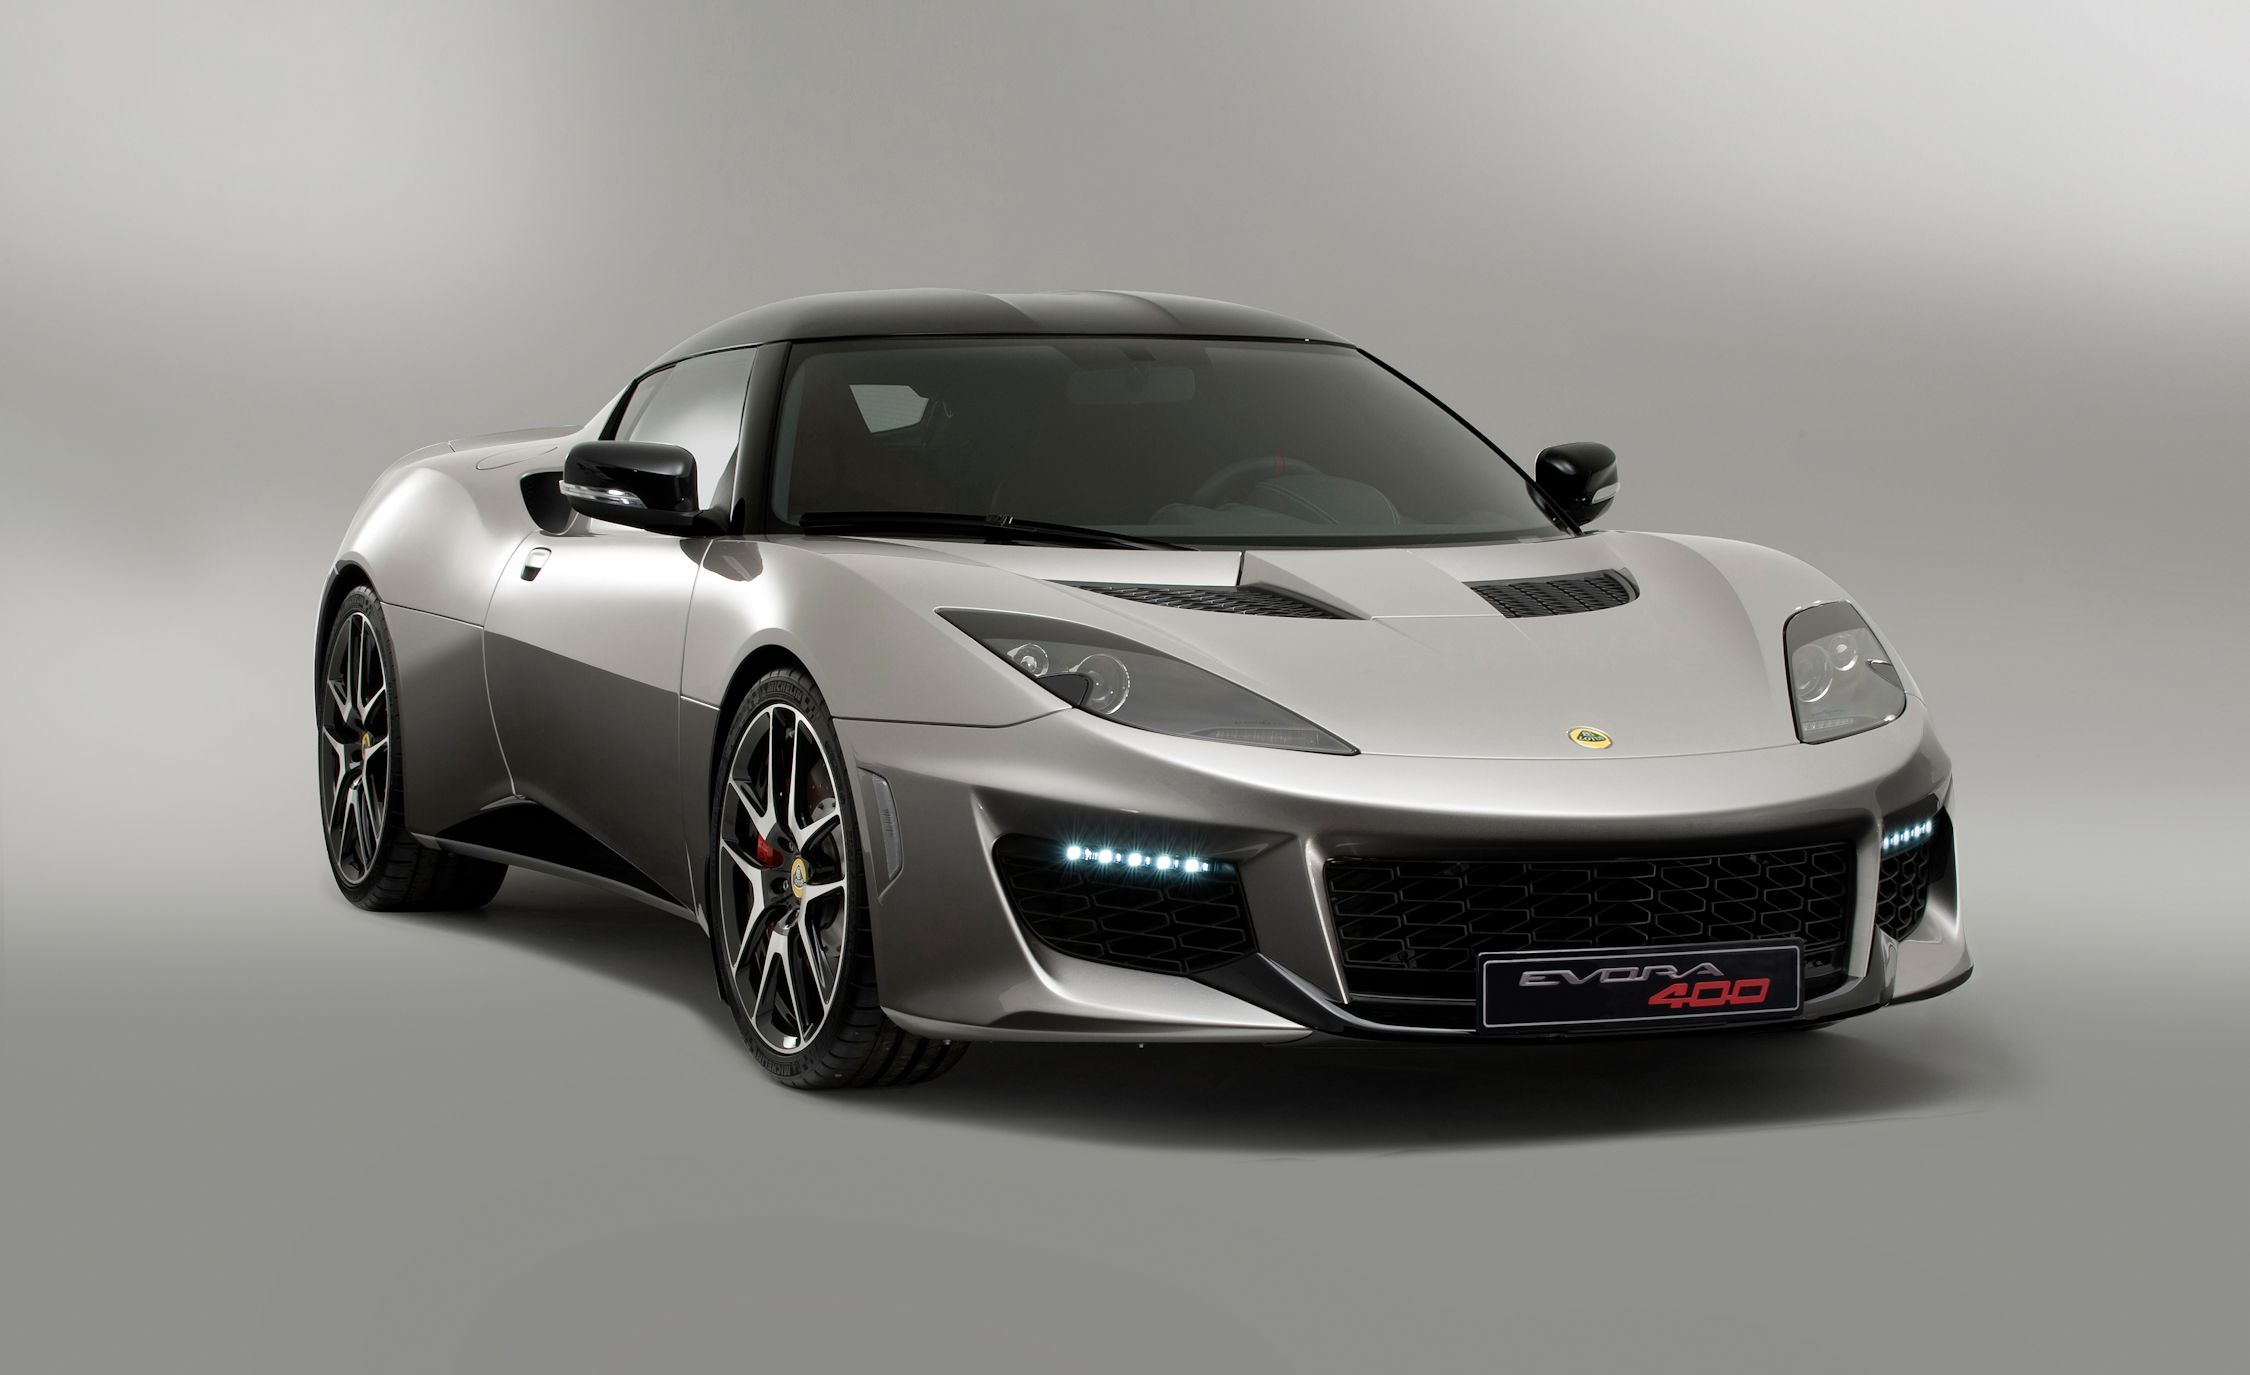 2019 Lotus Evora 400 Review, Pricing, and Specs